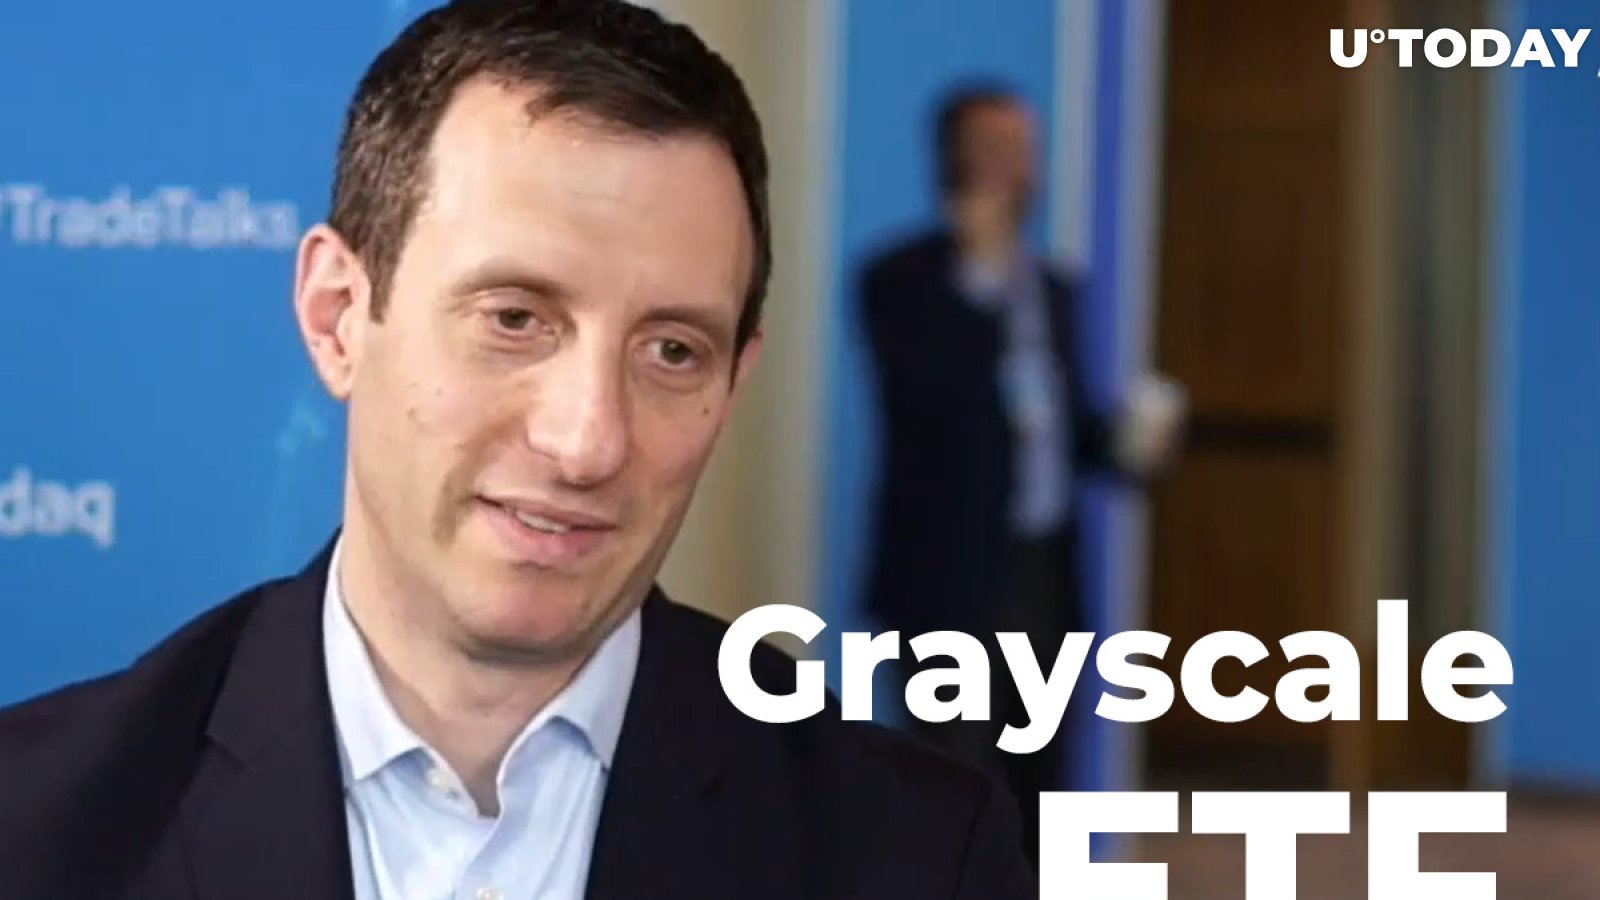 Grayscale Hires Industry Veteran David LaValle to Lead Its ETF Push